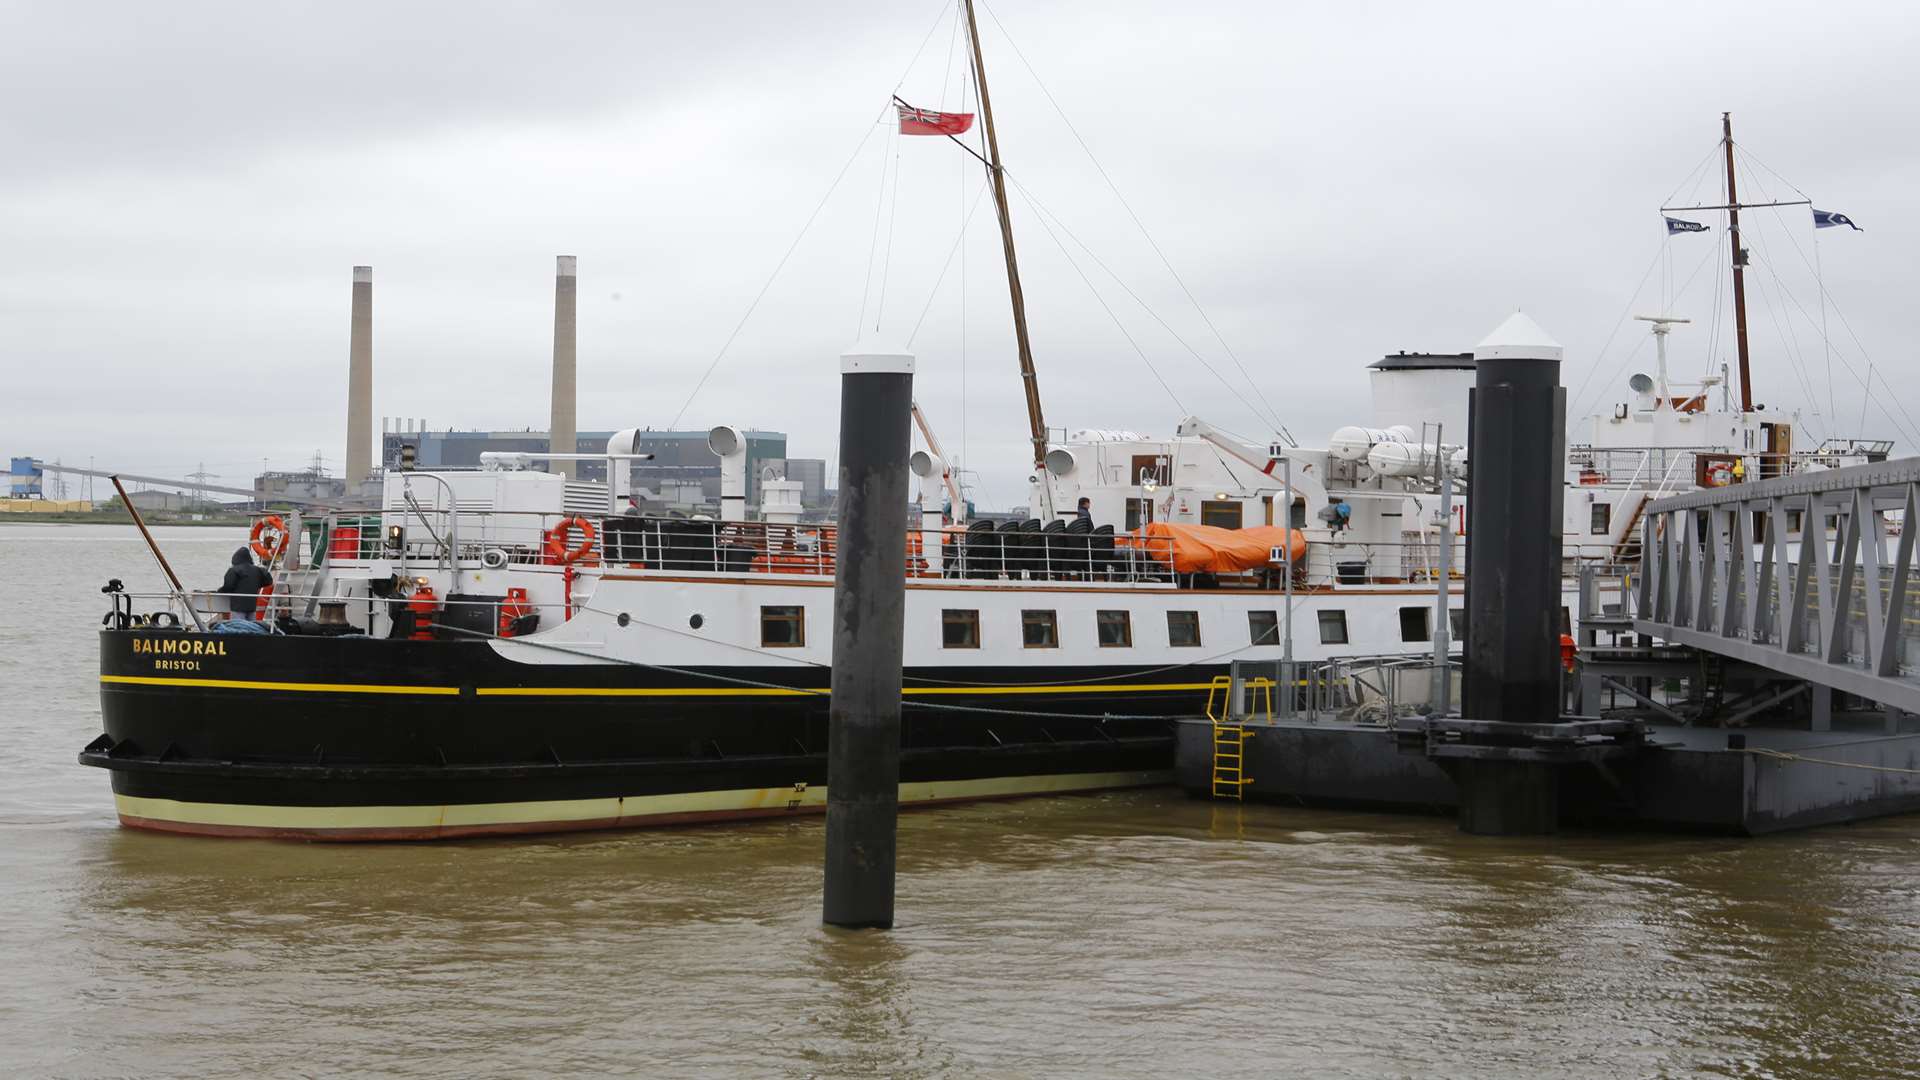 MV Balmoral, moored at Town Pier in West Street, Gravesend